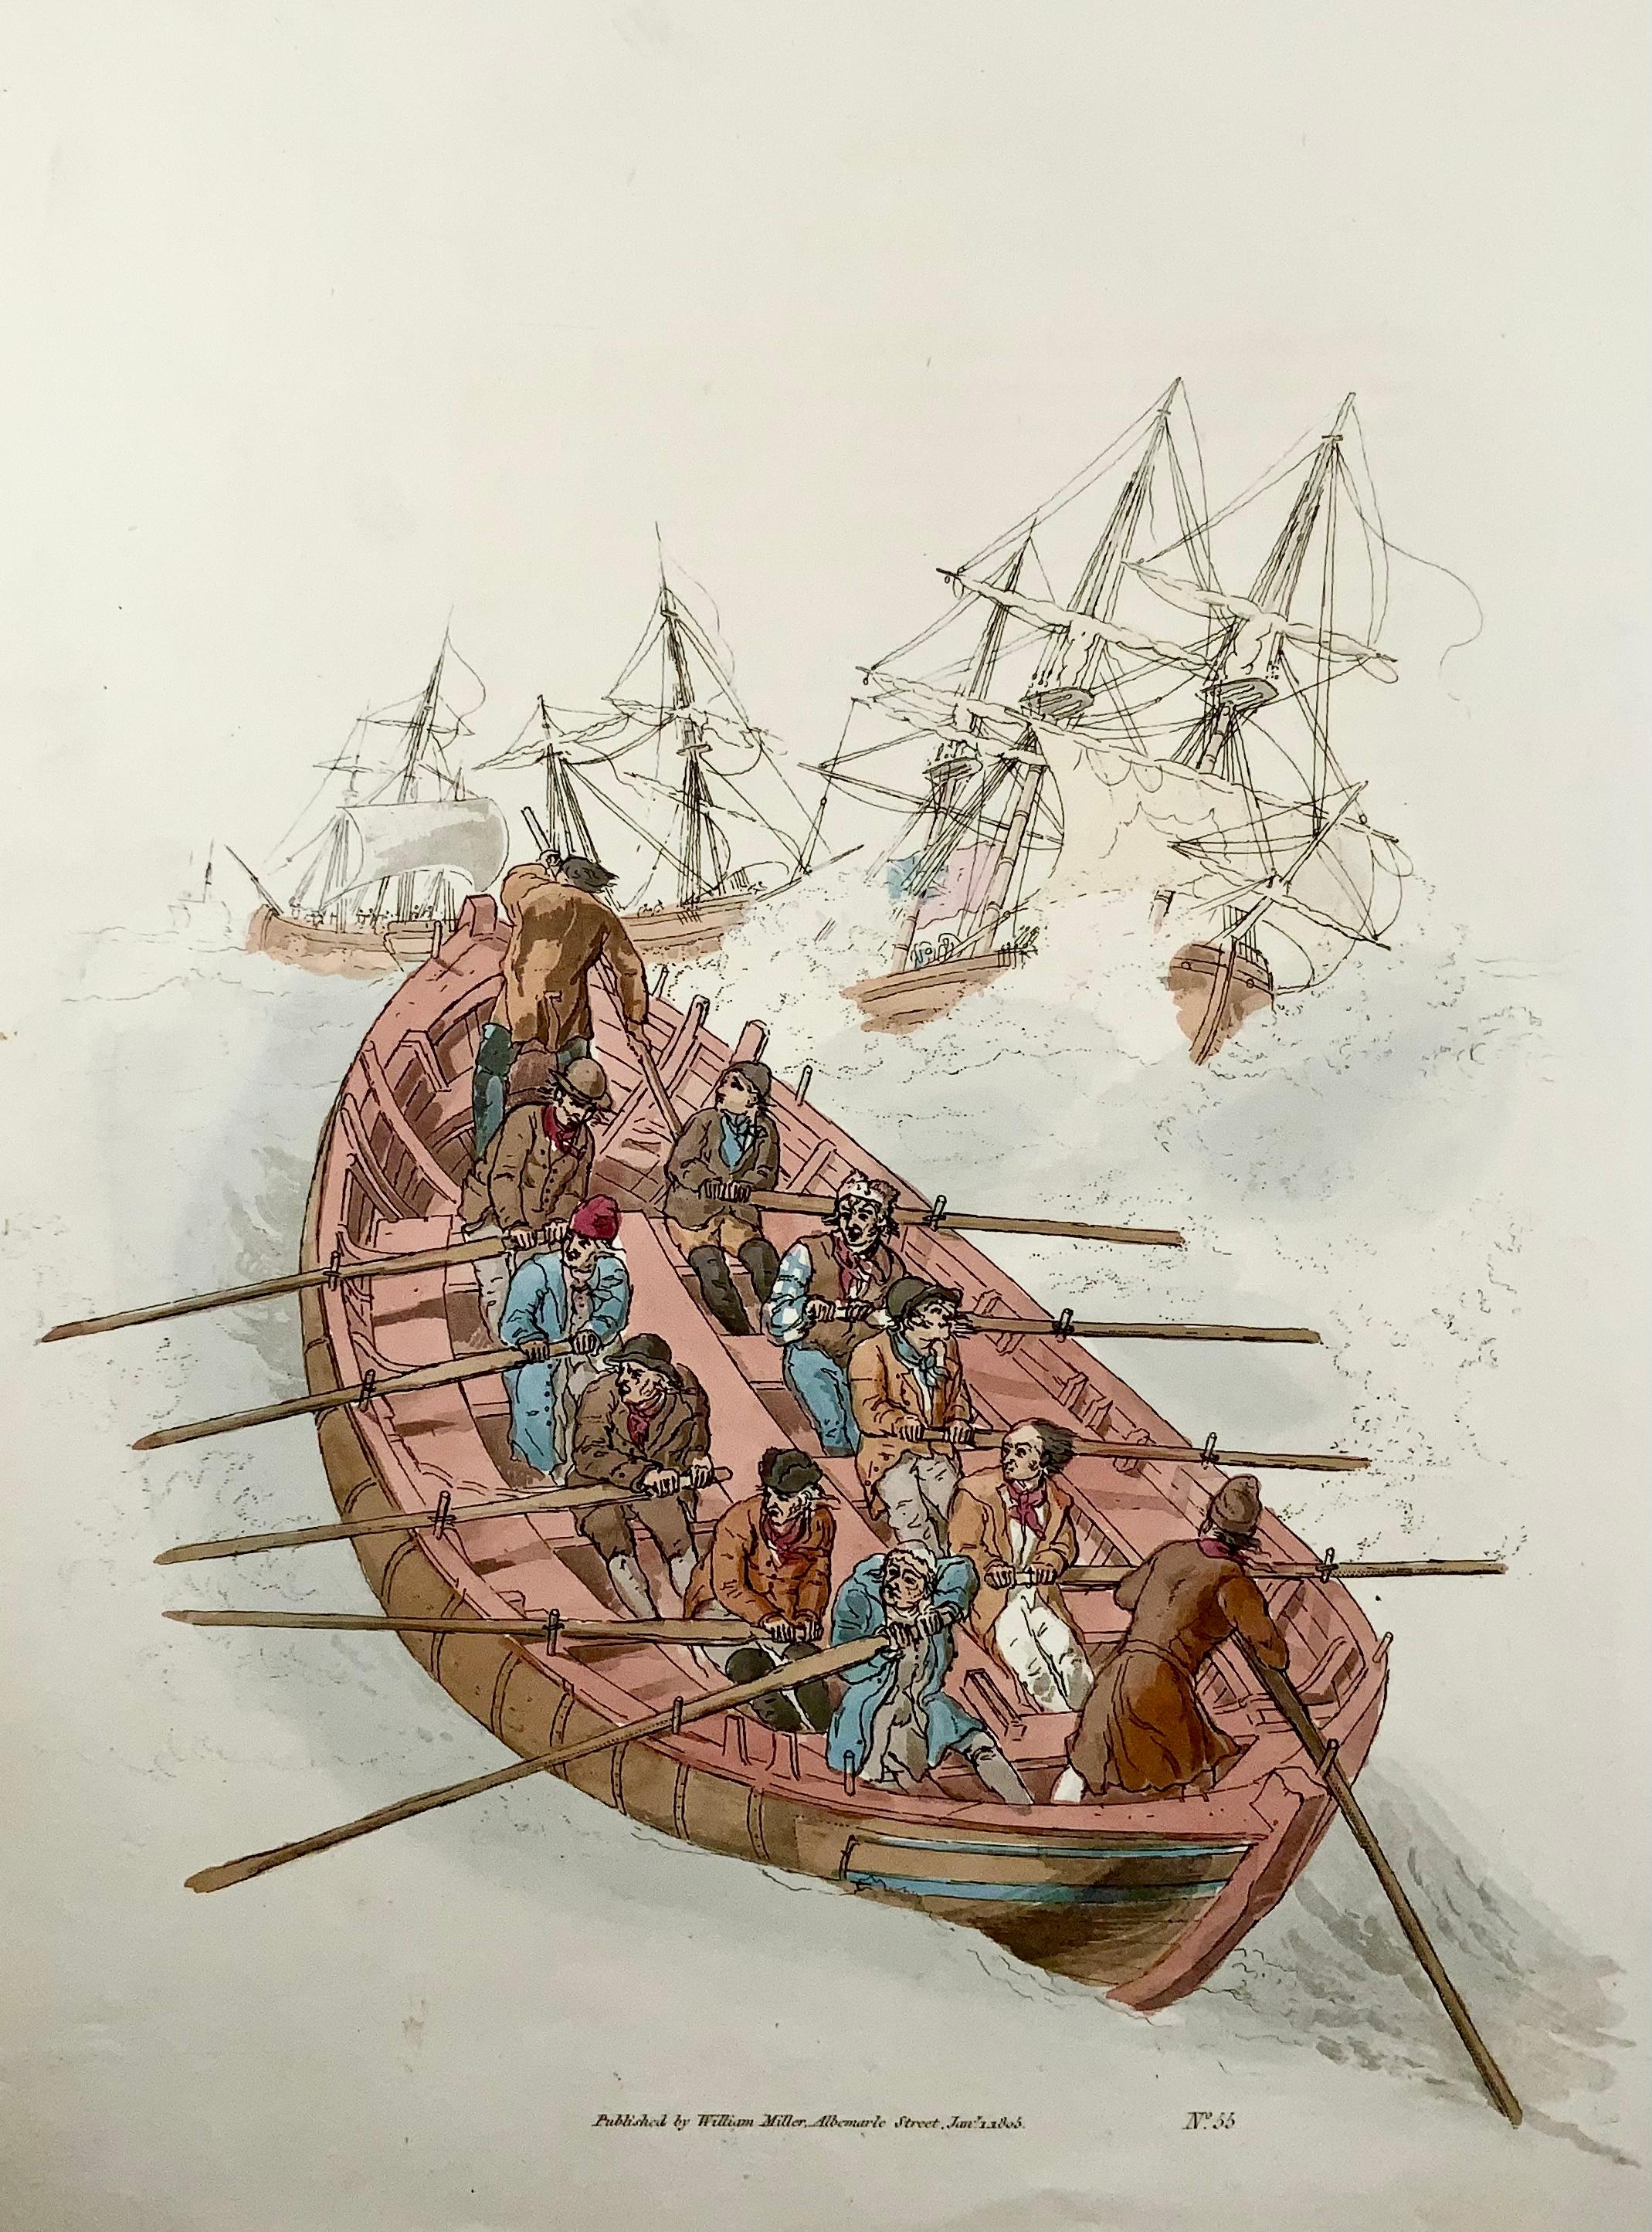 Sea rescuers heading in a row boat to save sailors from ships in a storm.

Hand colored engraving on paper of sailors in a long boat rowing against high seas among closely reefed ships of the line.

Published by William Miller